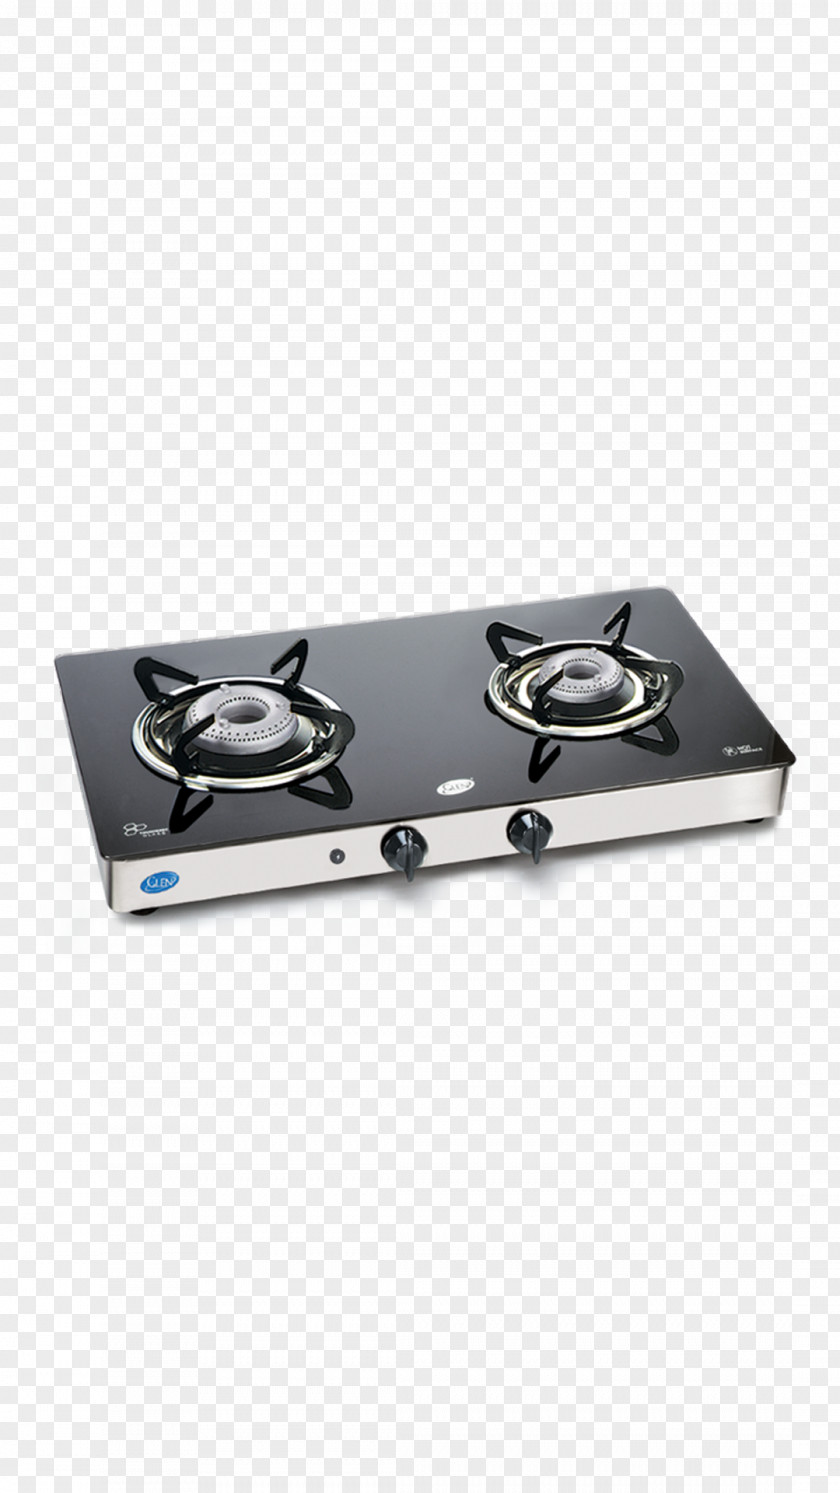 Glass Gas Stove Cooking Ranges Burner PNG